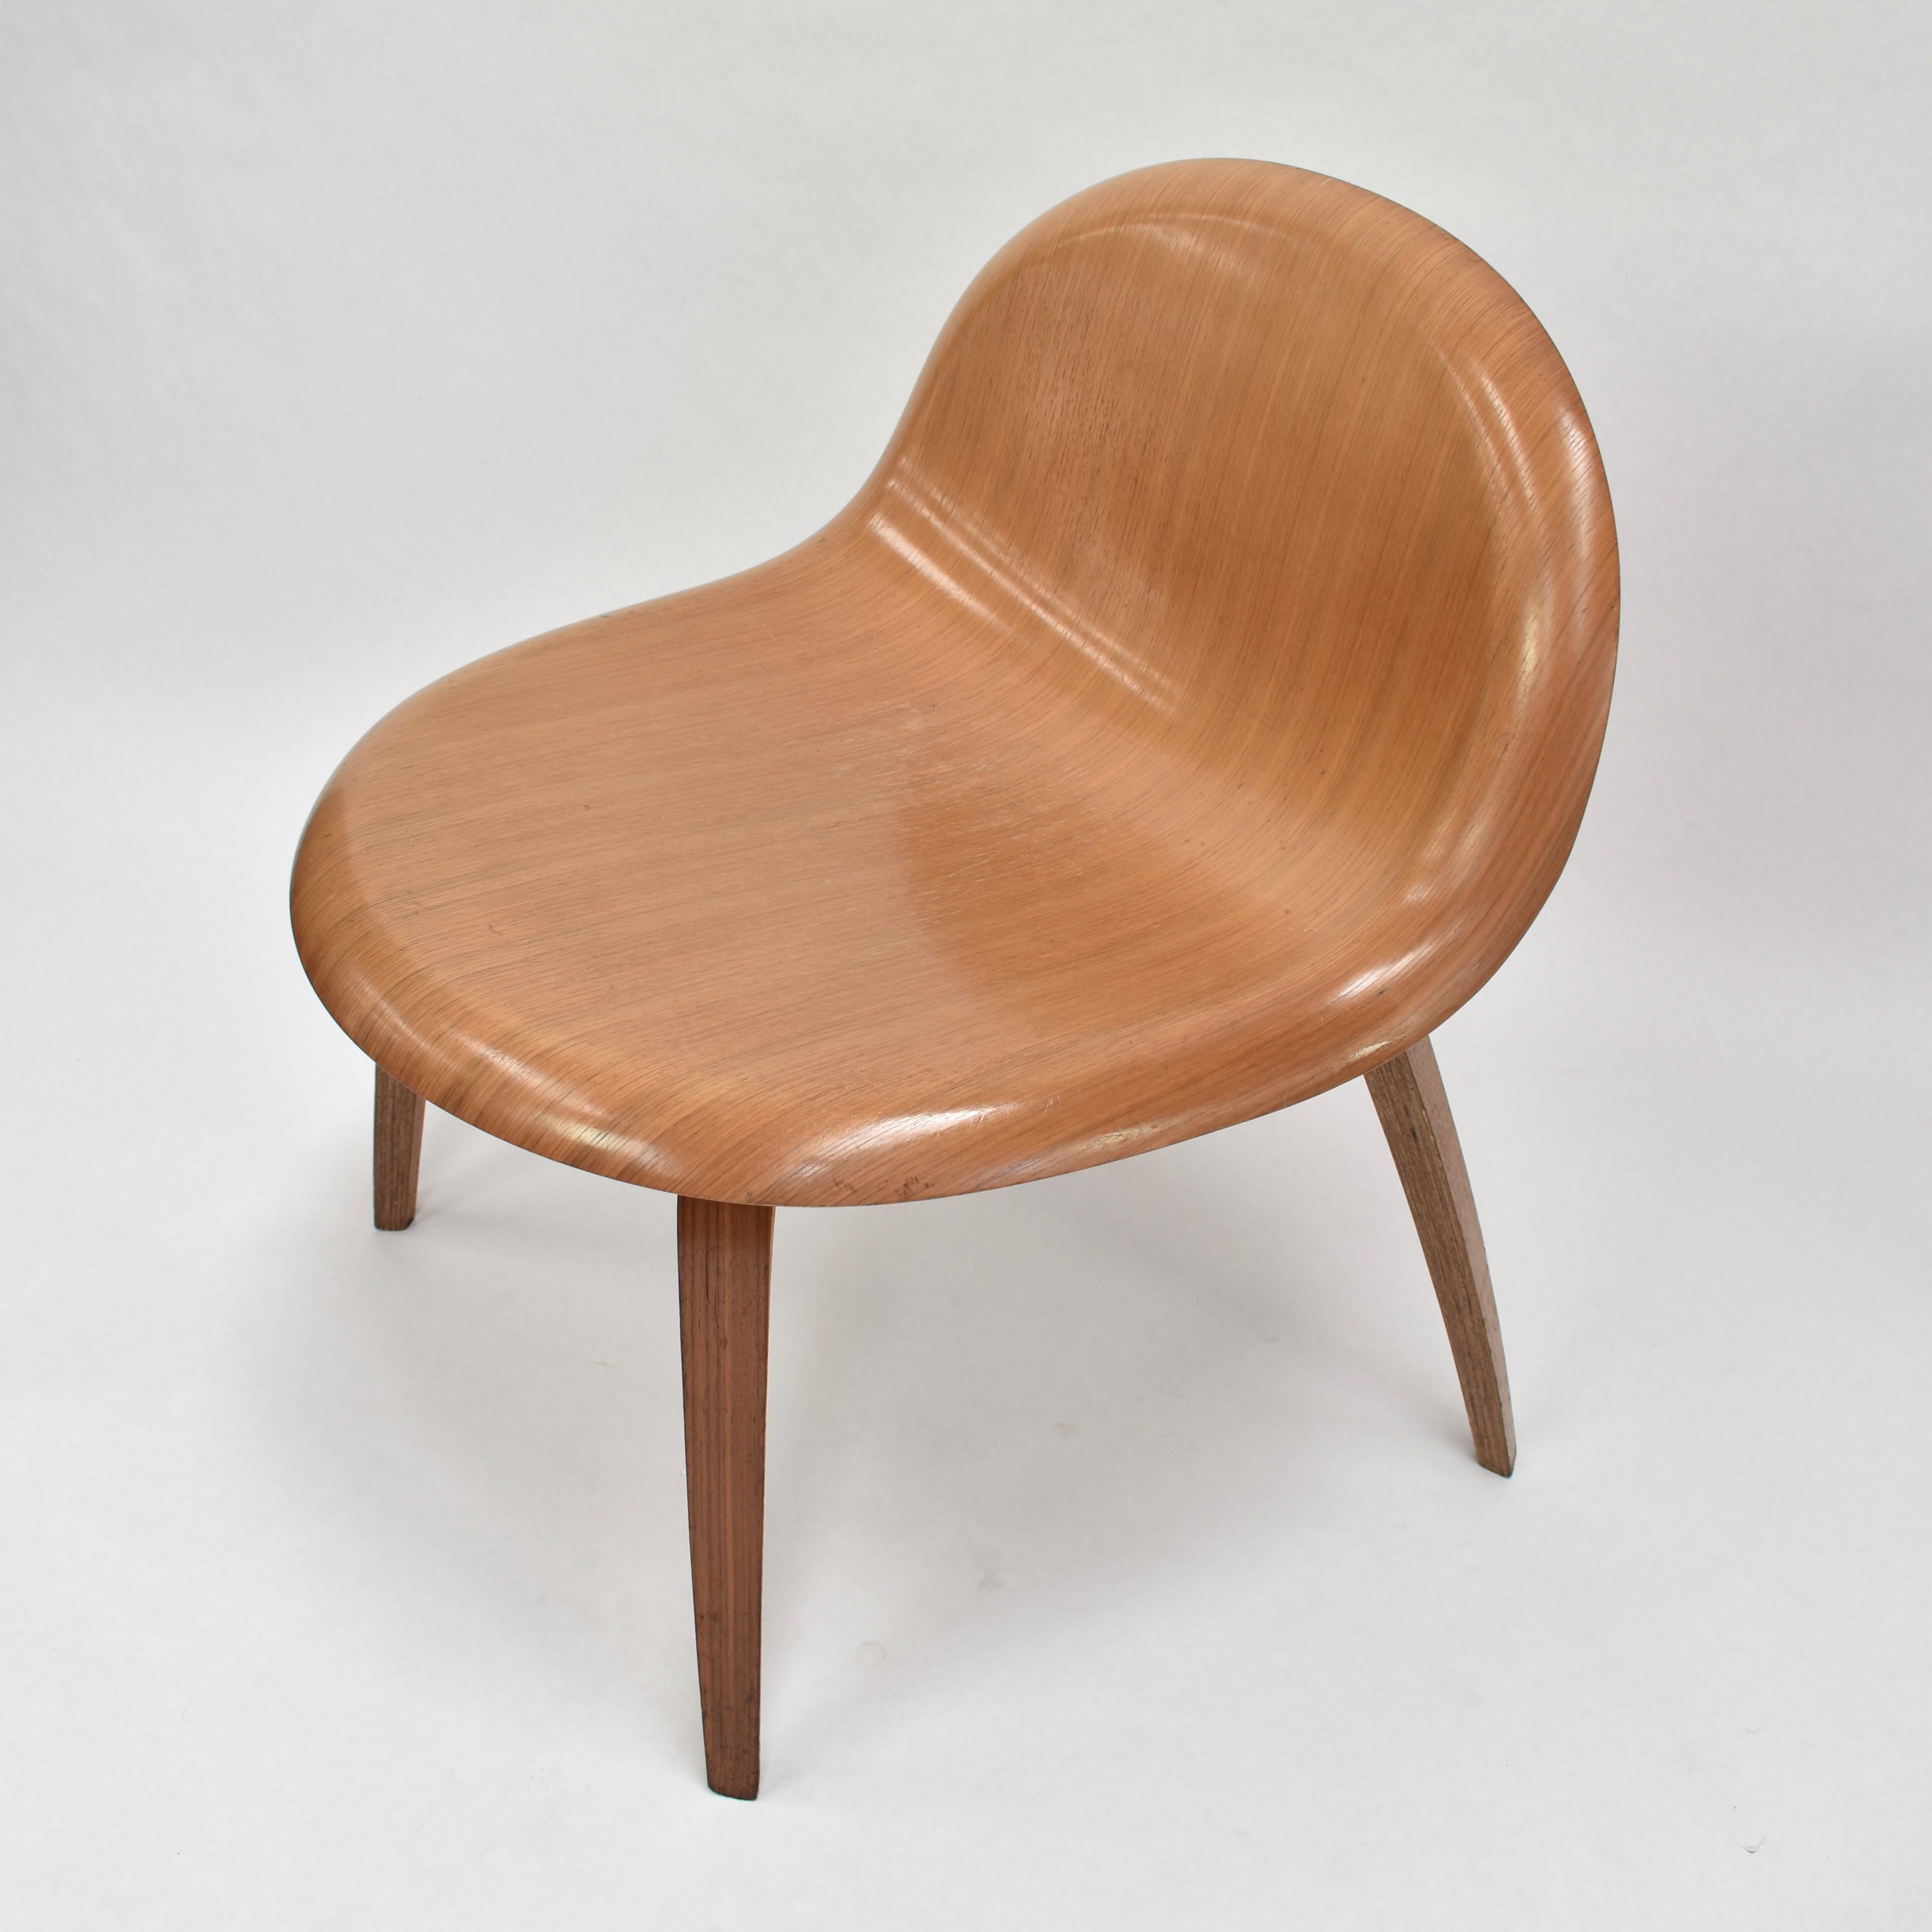 Molded Plywood Lounge Chairs by Boris Berlin and Poul Christiansen for Komplot 3